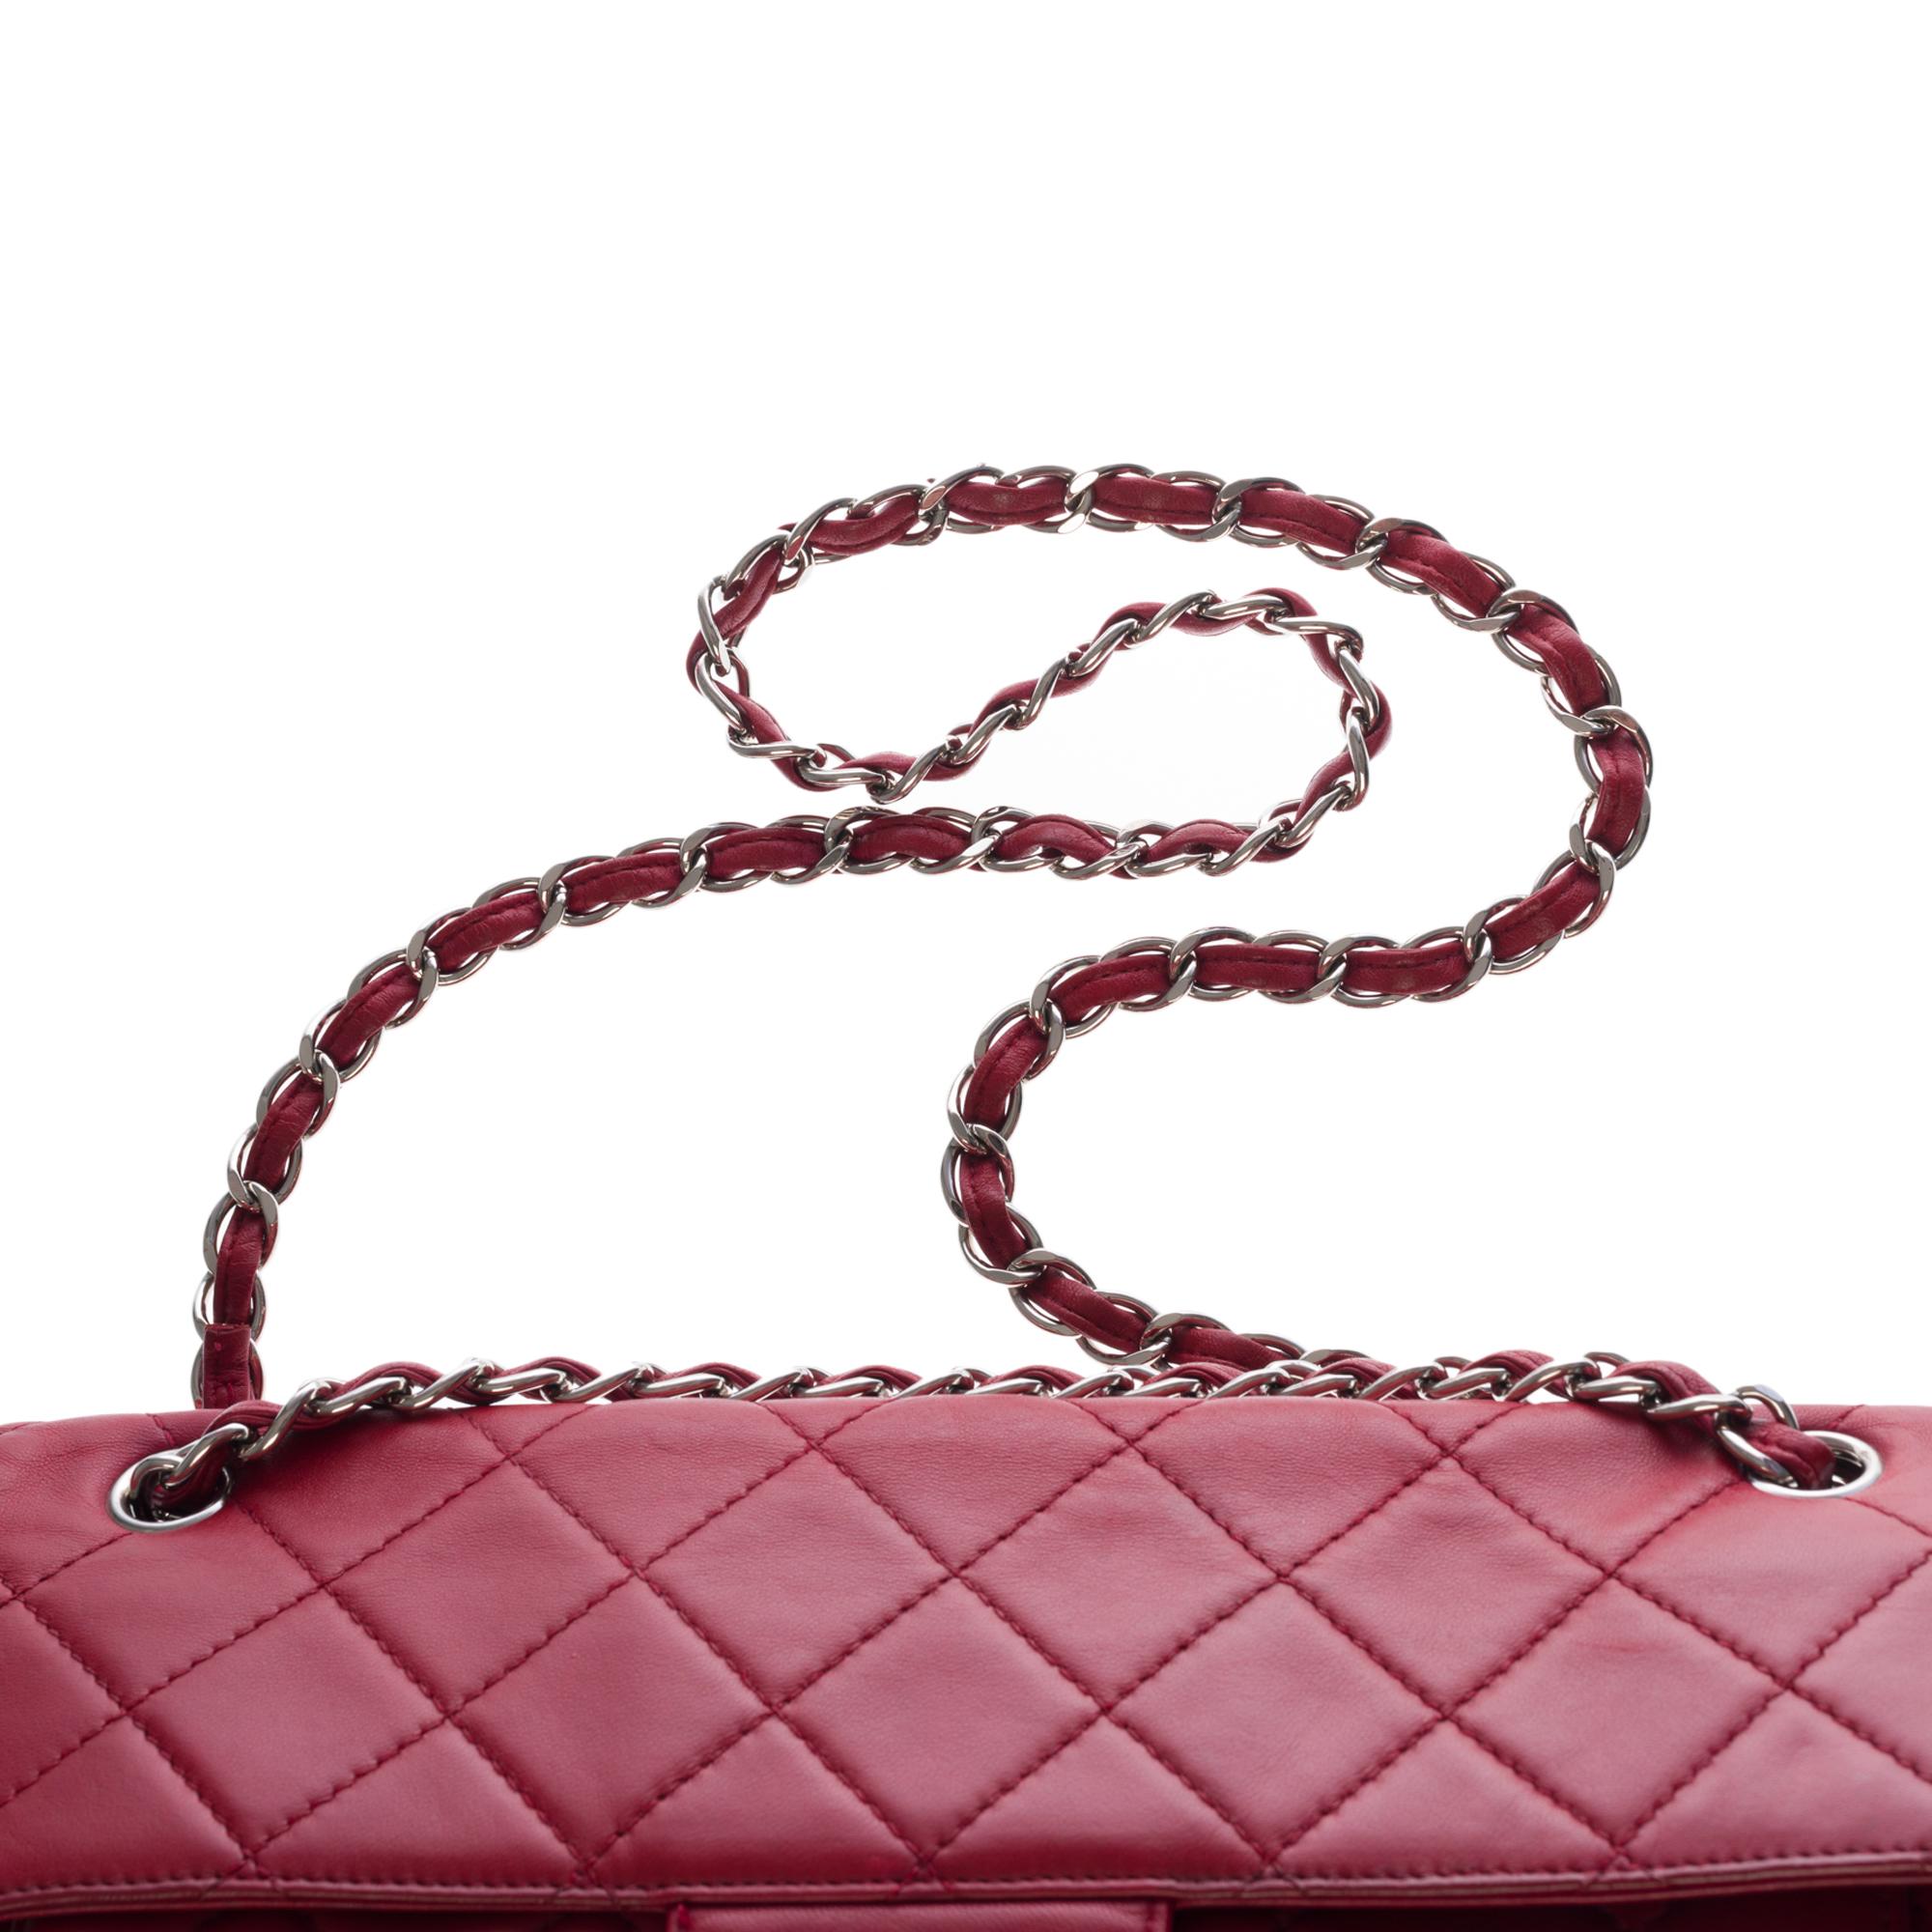 Chanel Classic 2.55 Maxi shoulder bag in red quilted leather, SHW For Sale 5